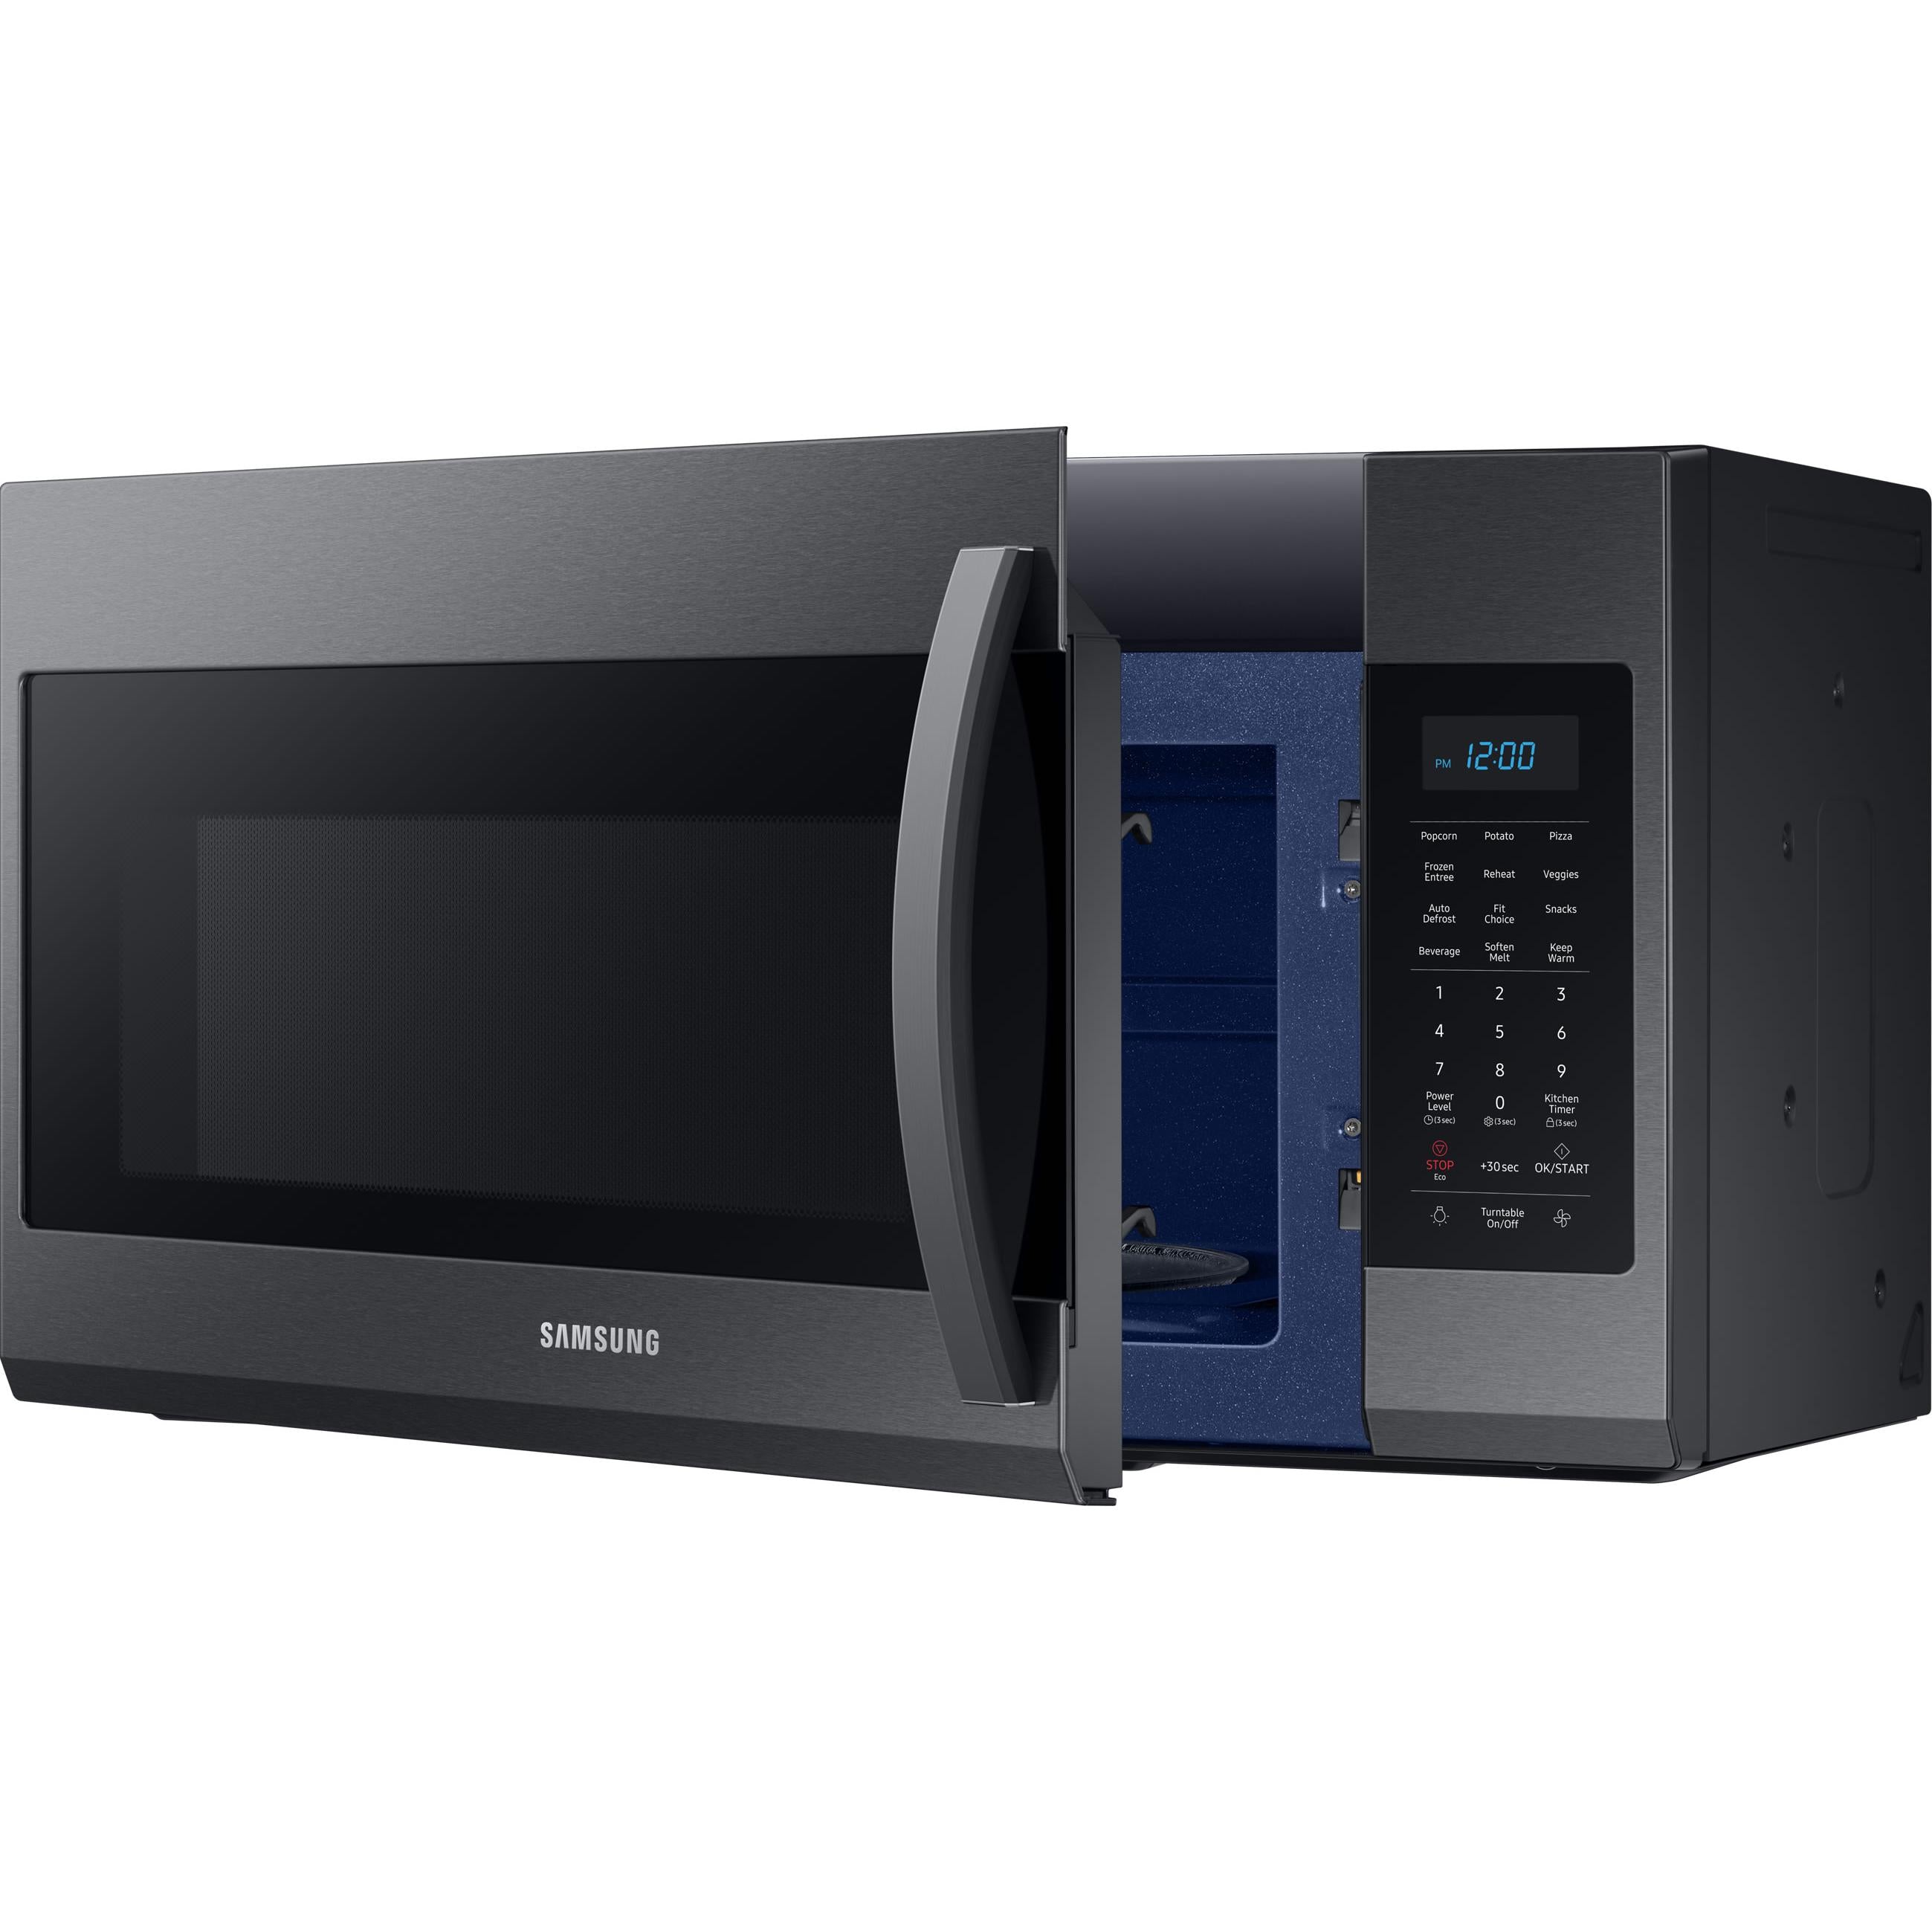 Samsung 30-inch, 1.9 cu.ft. Over-the-Range Microwave Oven with Eco Mode ME19R7041FG/AA